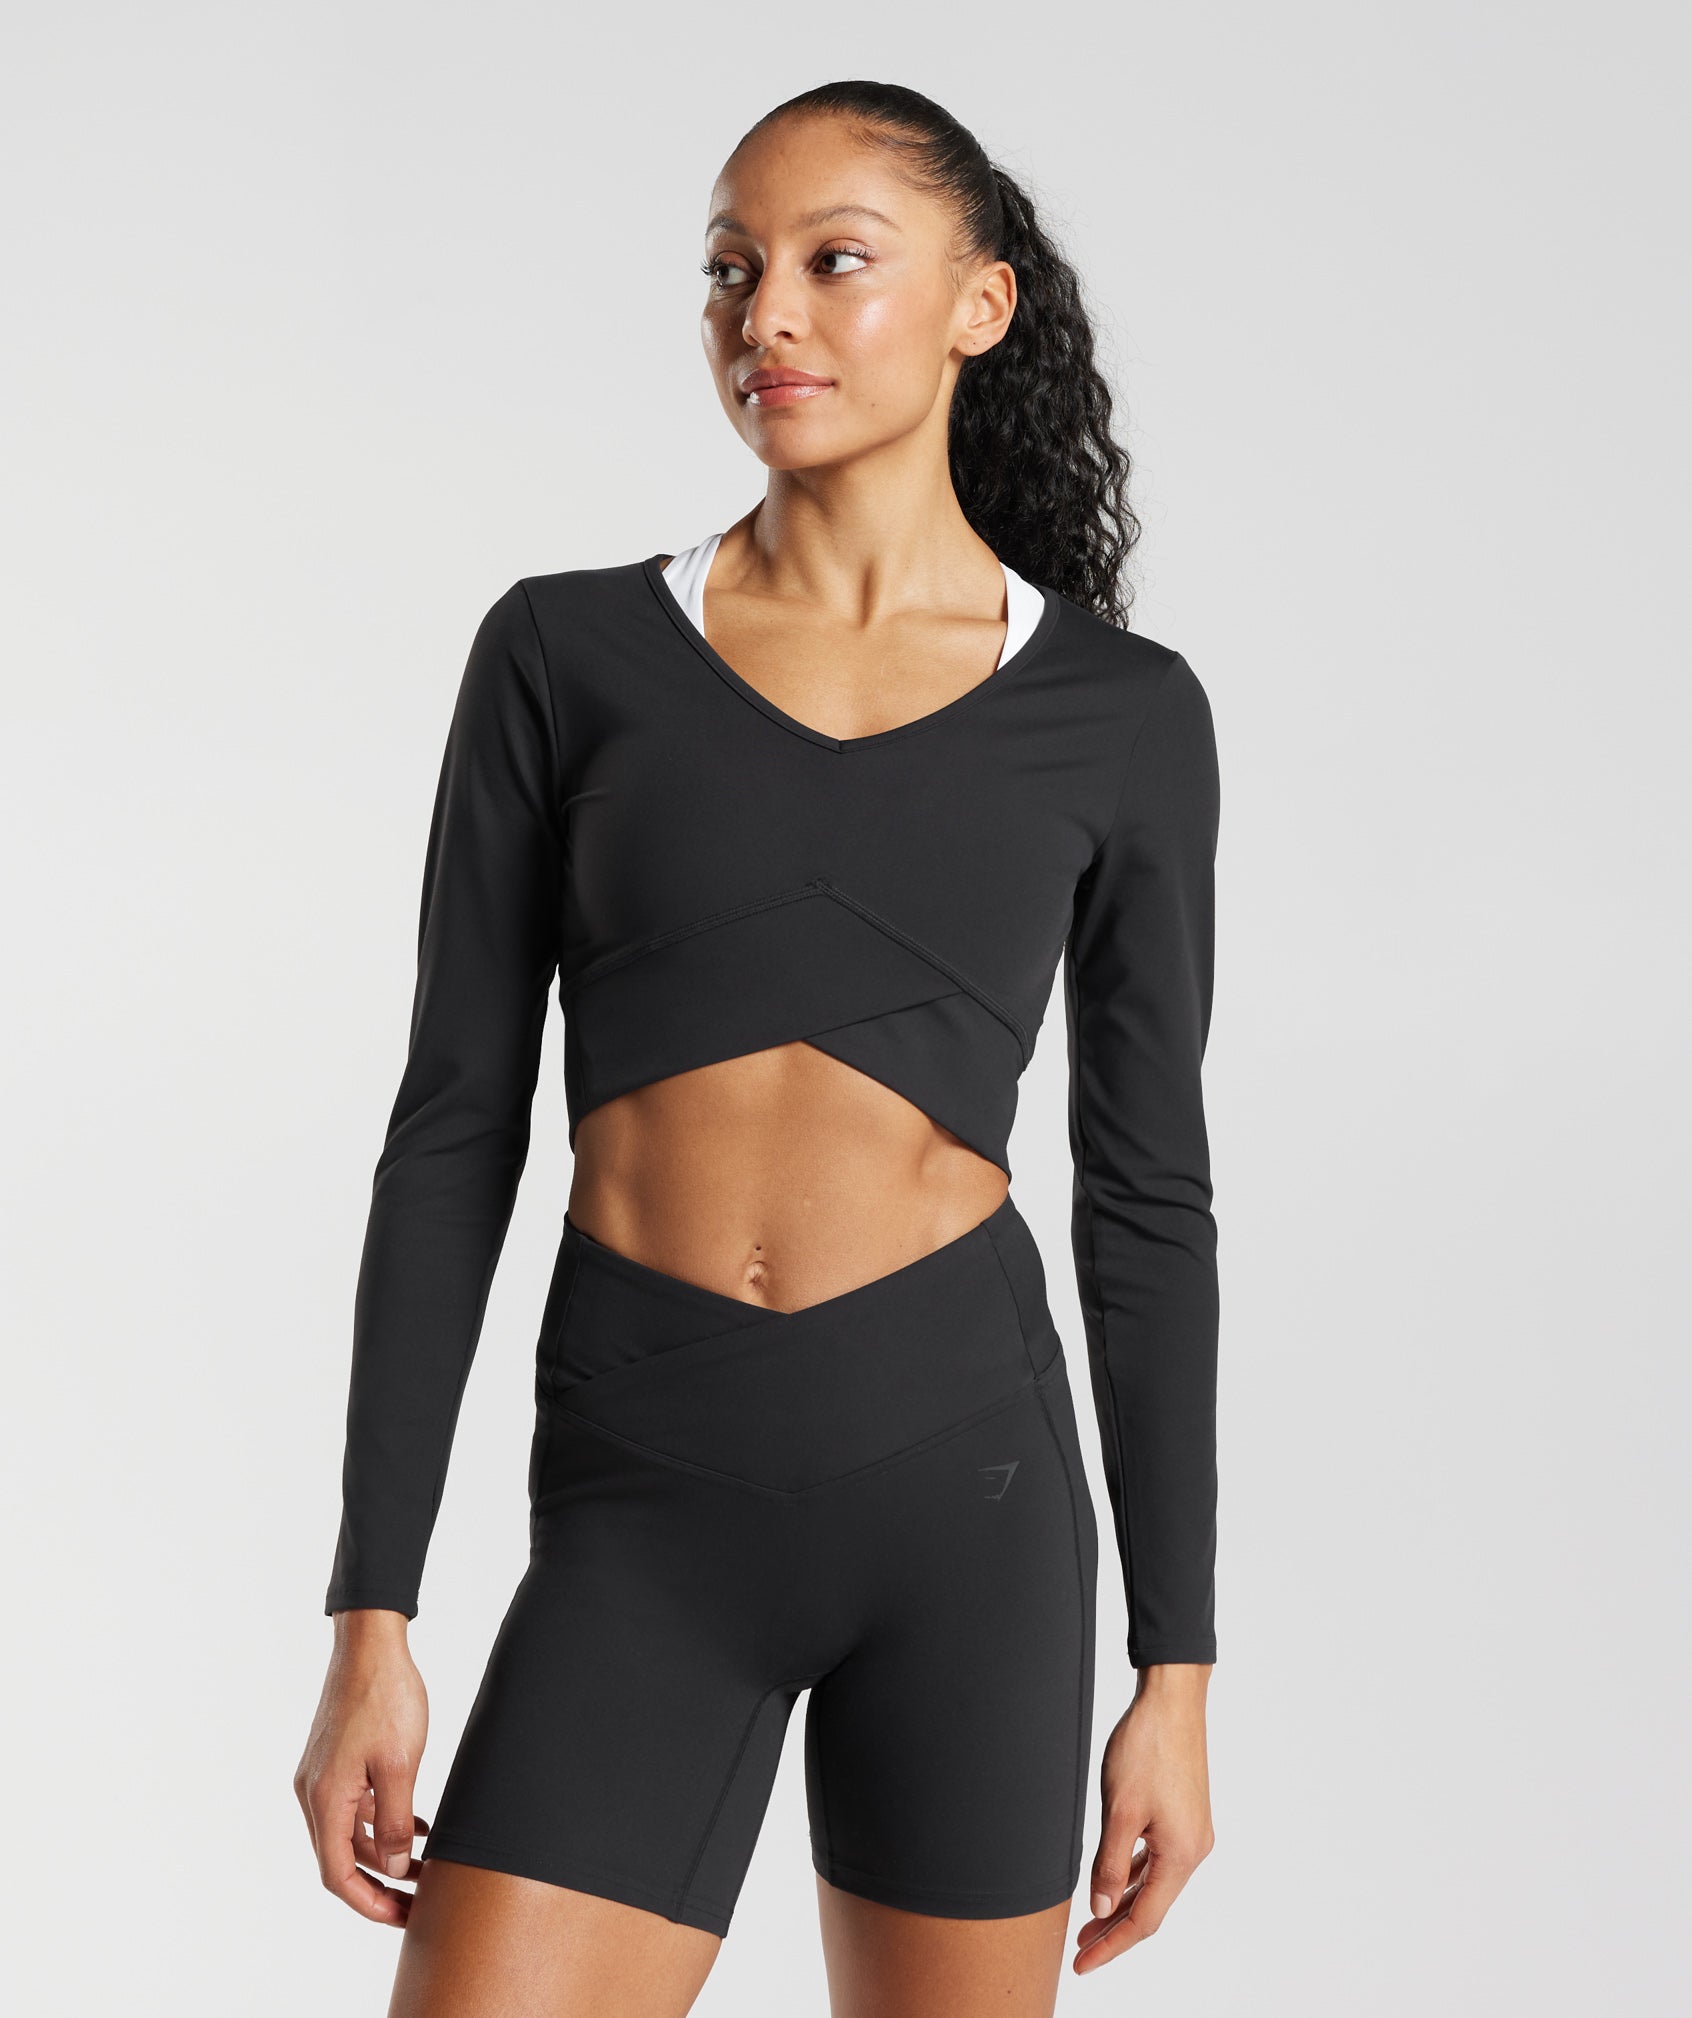 Frontwalk Long Sleeve Crop Tops with s Workout Athletic Gym Shirts Cropped  Sweatshirts for Women